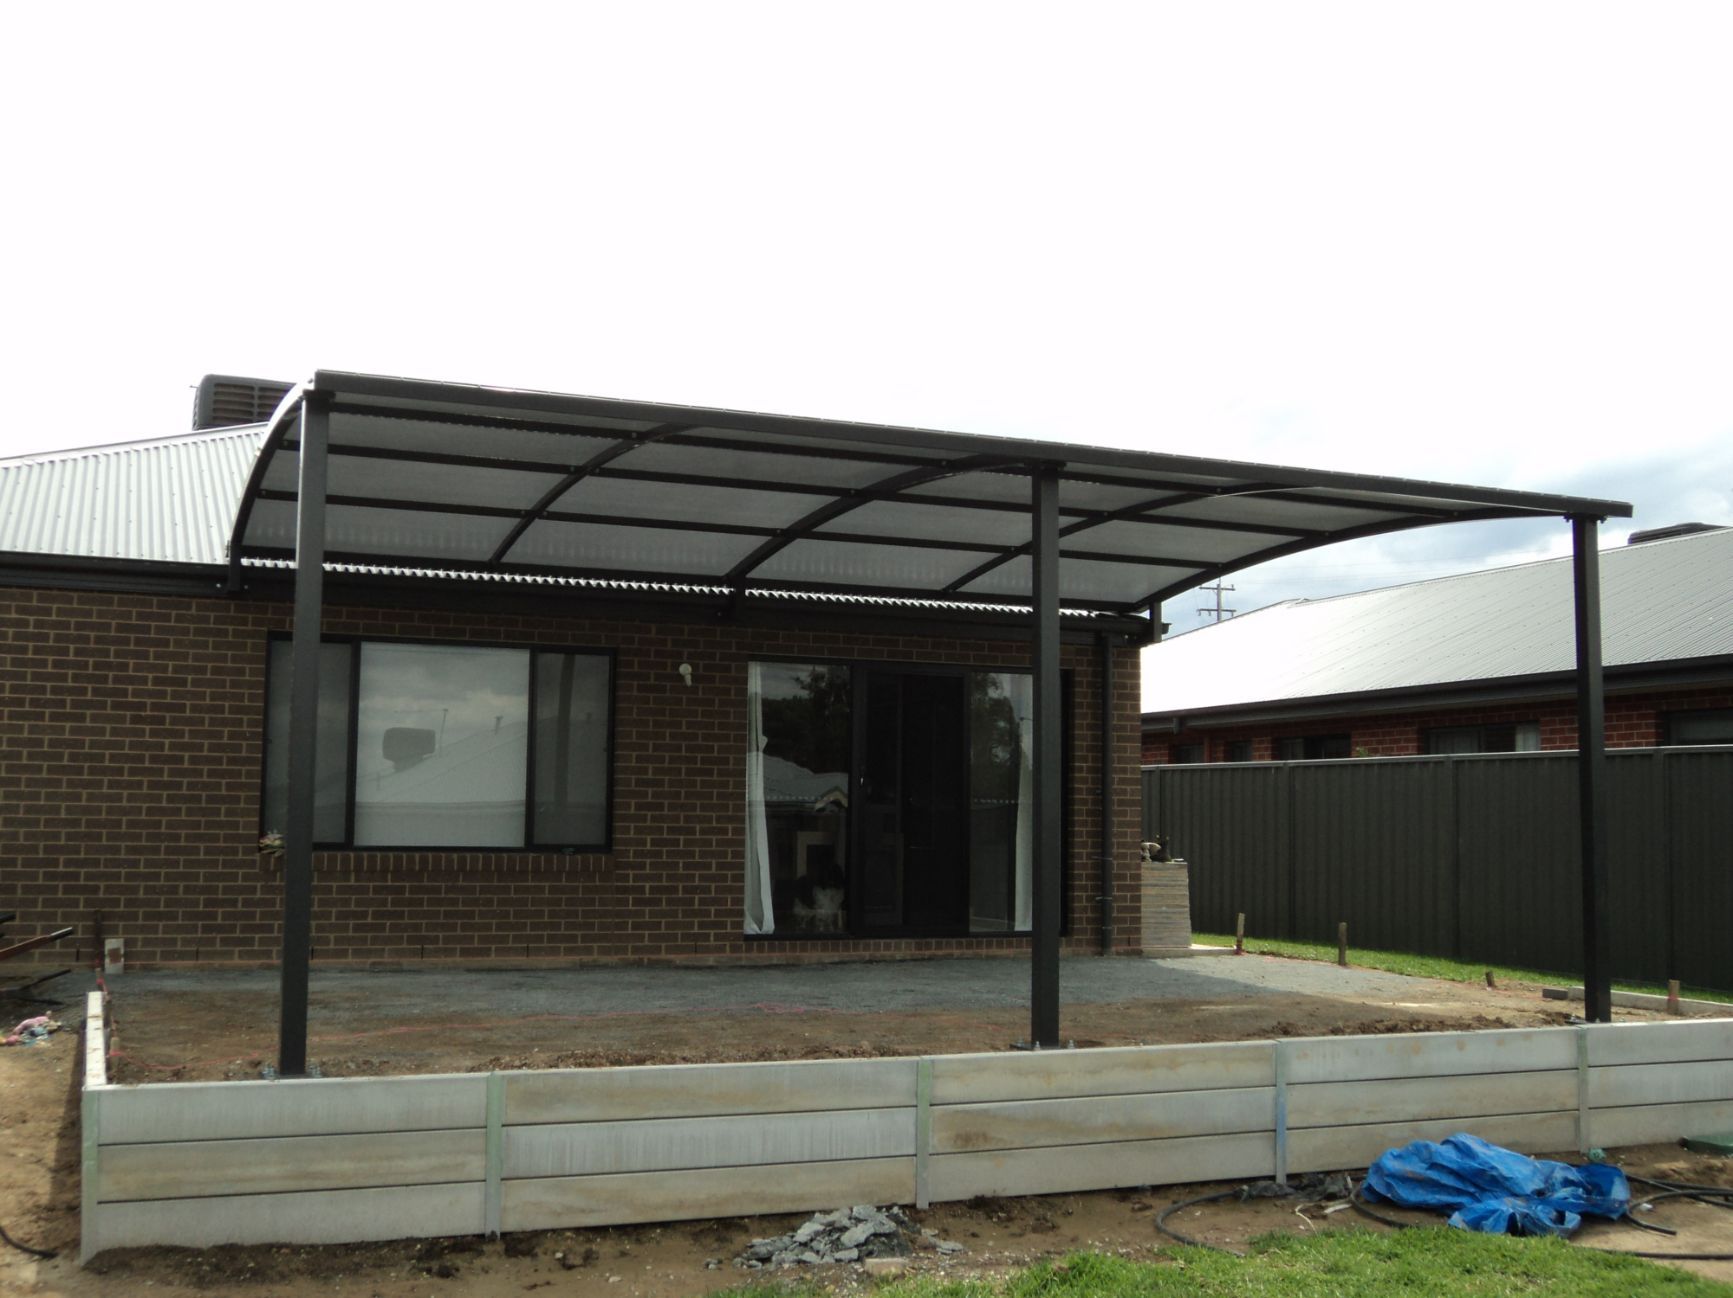 Cantilever Shade At The Backyard Of The House — Custom Blinds in Wodonga, NSW